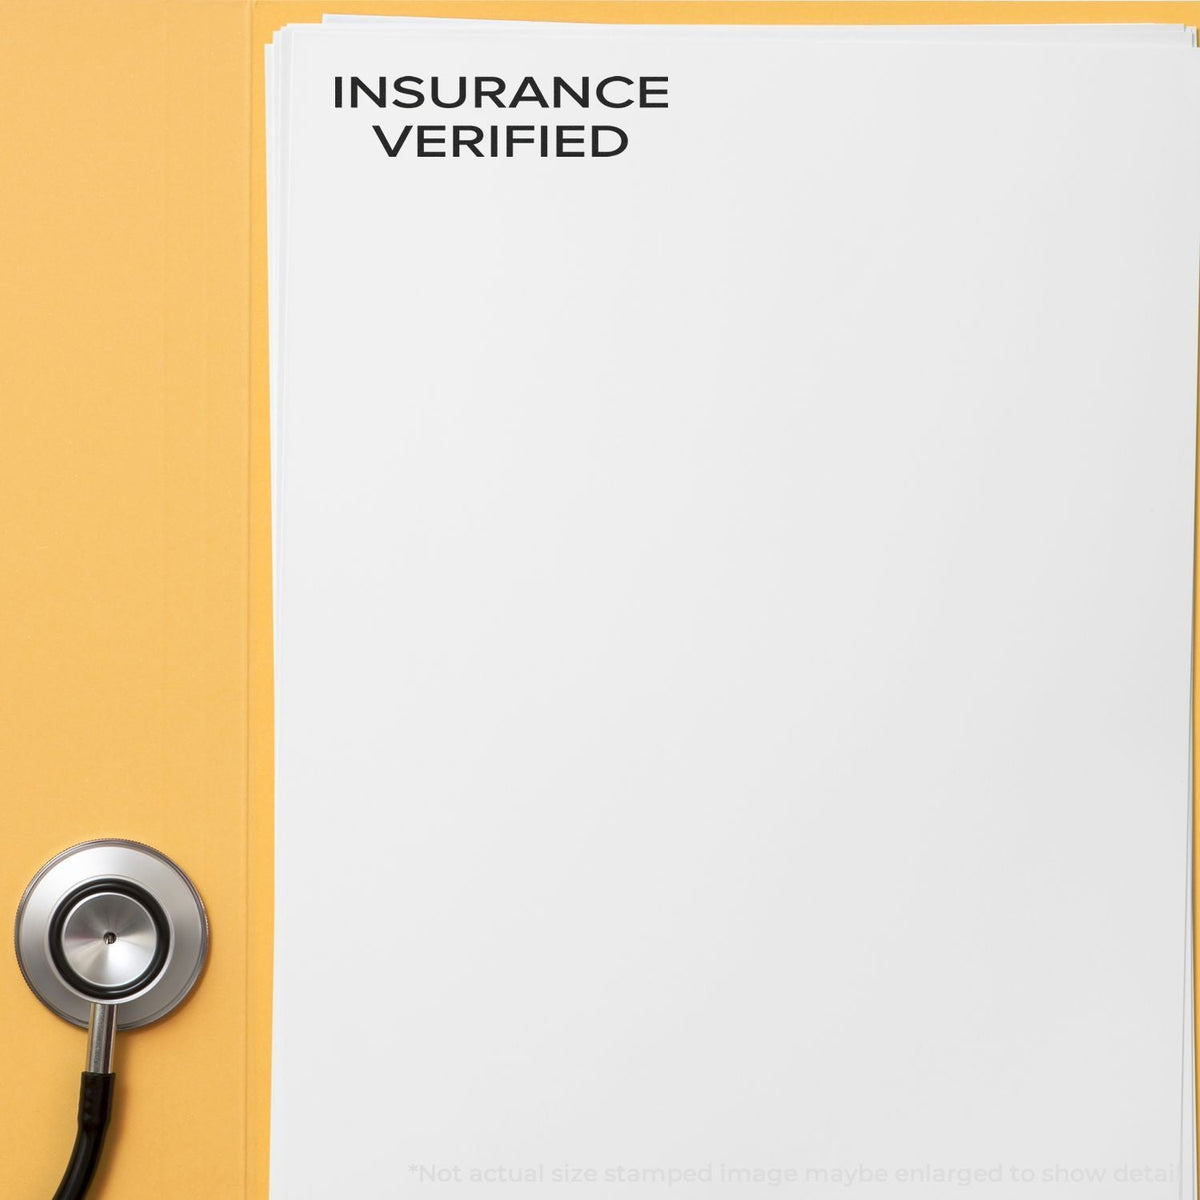 In Use Self-Inking Narrow Font Insurance Verified Stamp Image